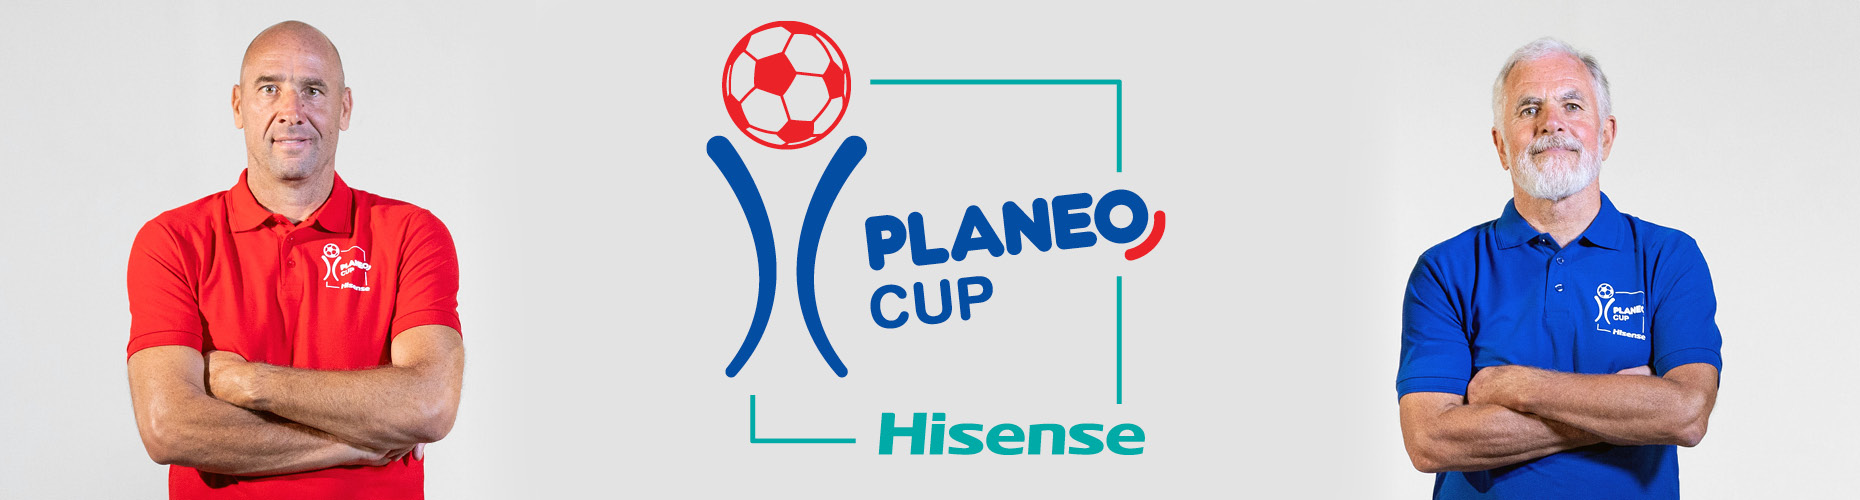 Planeo Cup